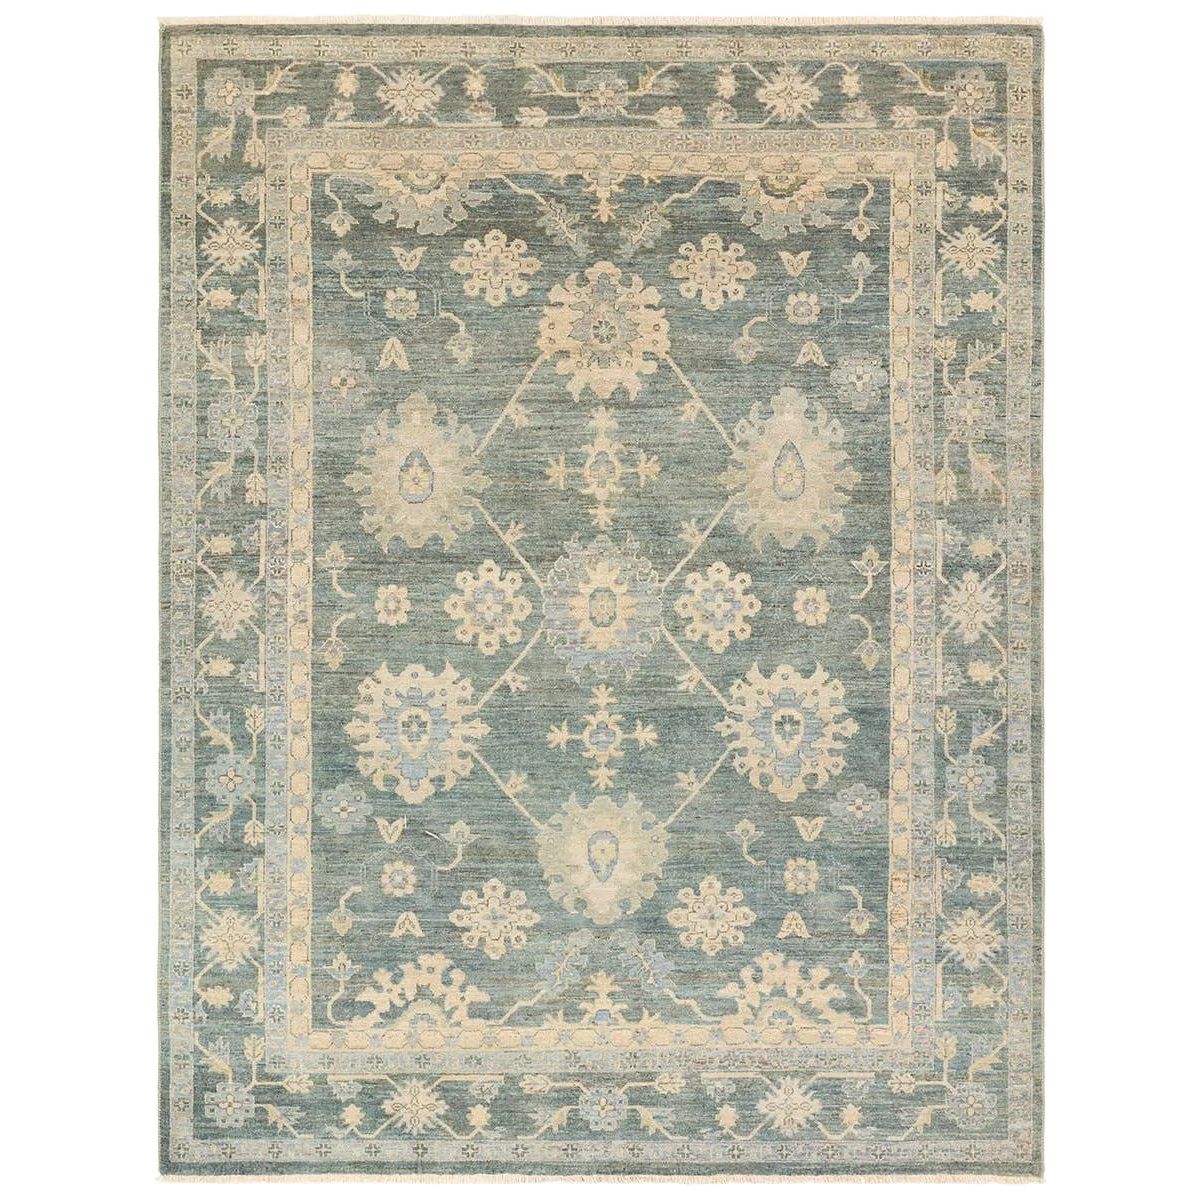 The Orenda Kerensa features heirloom-quality designs of muted and uniquely updated Old World patterns. The Kerensa area rug boasts a beautifully washed medallion motif with an antique Oushak-inspired vibe. The cream tone is accented with cool blues, greens, and warm beige hues for added depth and intrigue. Amethyst Home provides interior design, new home construction design consulting, vintage area rugs, and lighting in the Winter Garden metro area.